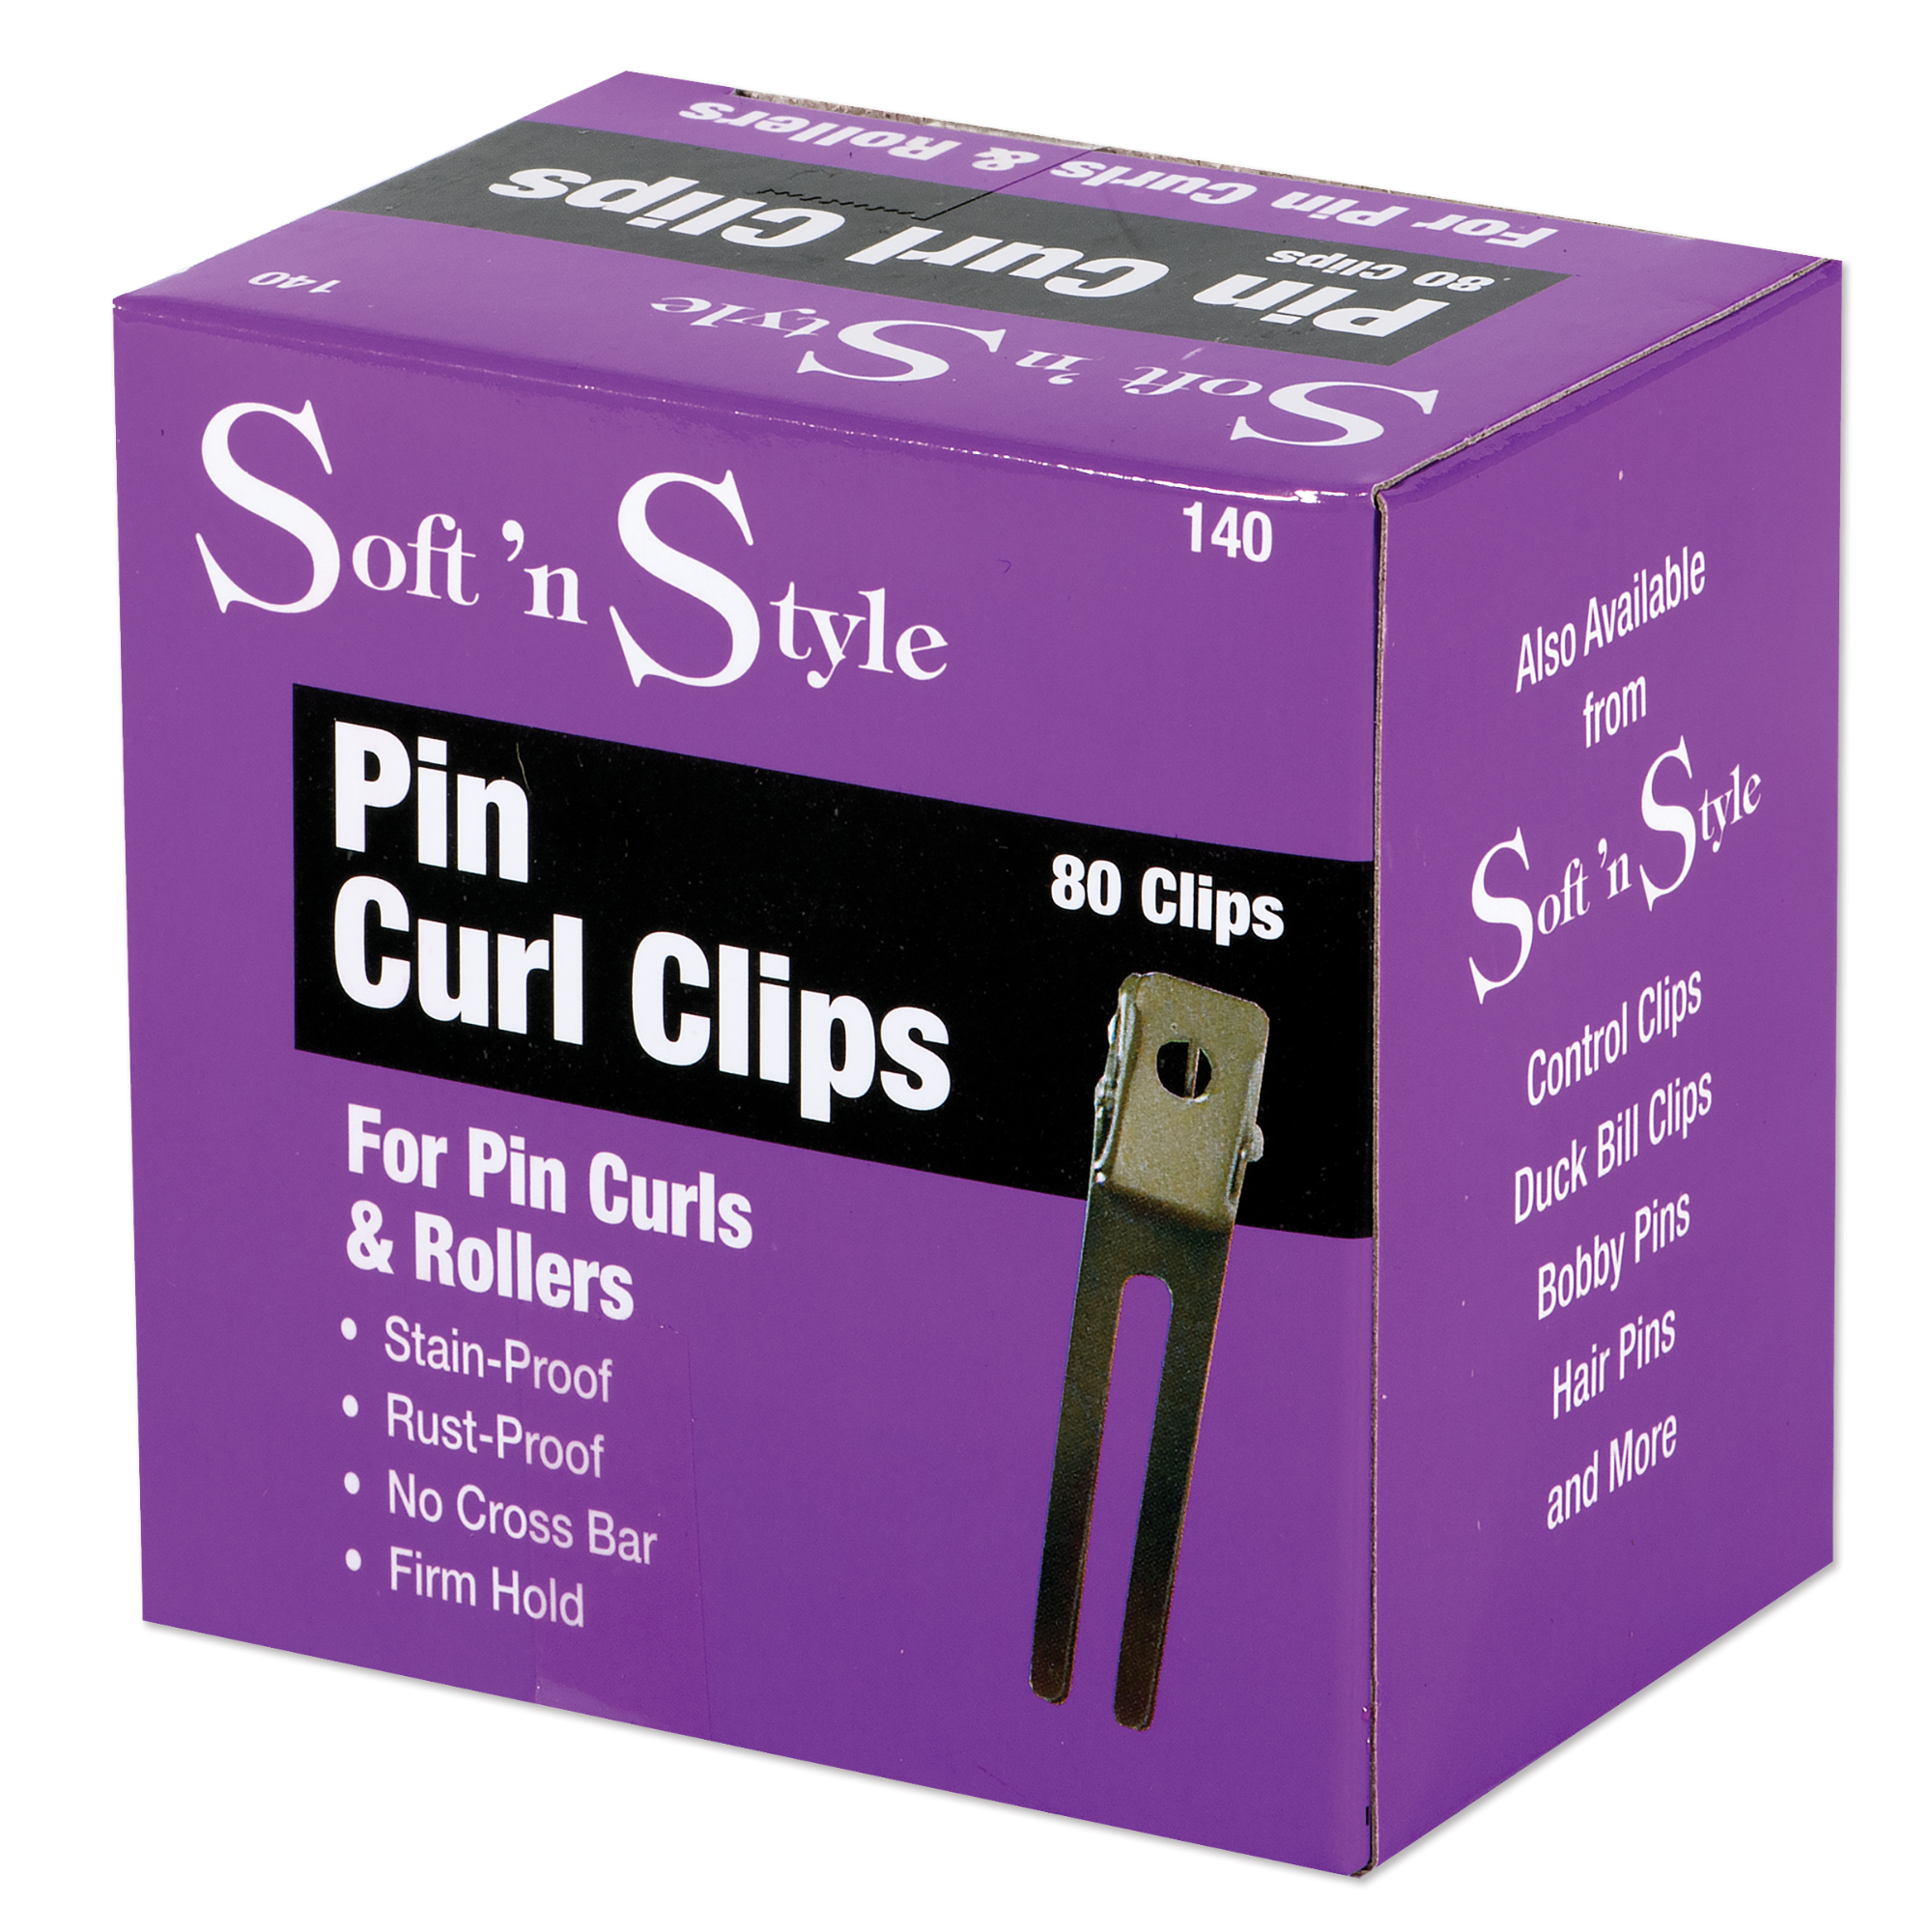 Double Prong Pin Curl Clips, box of 80